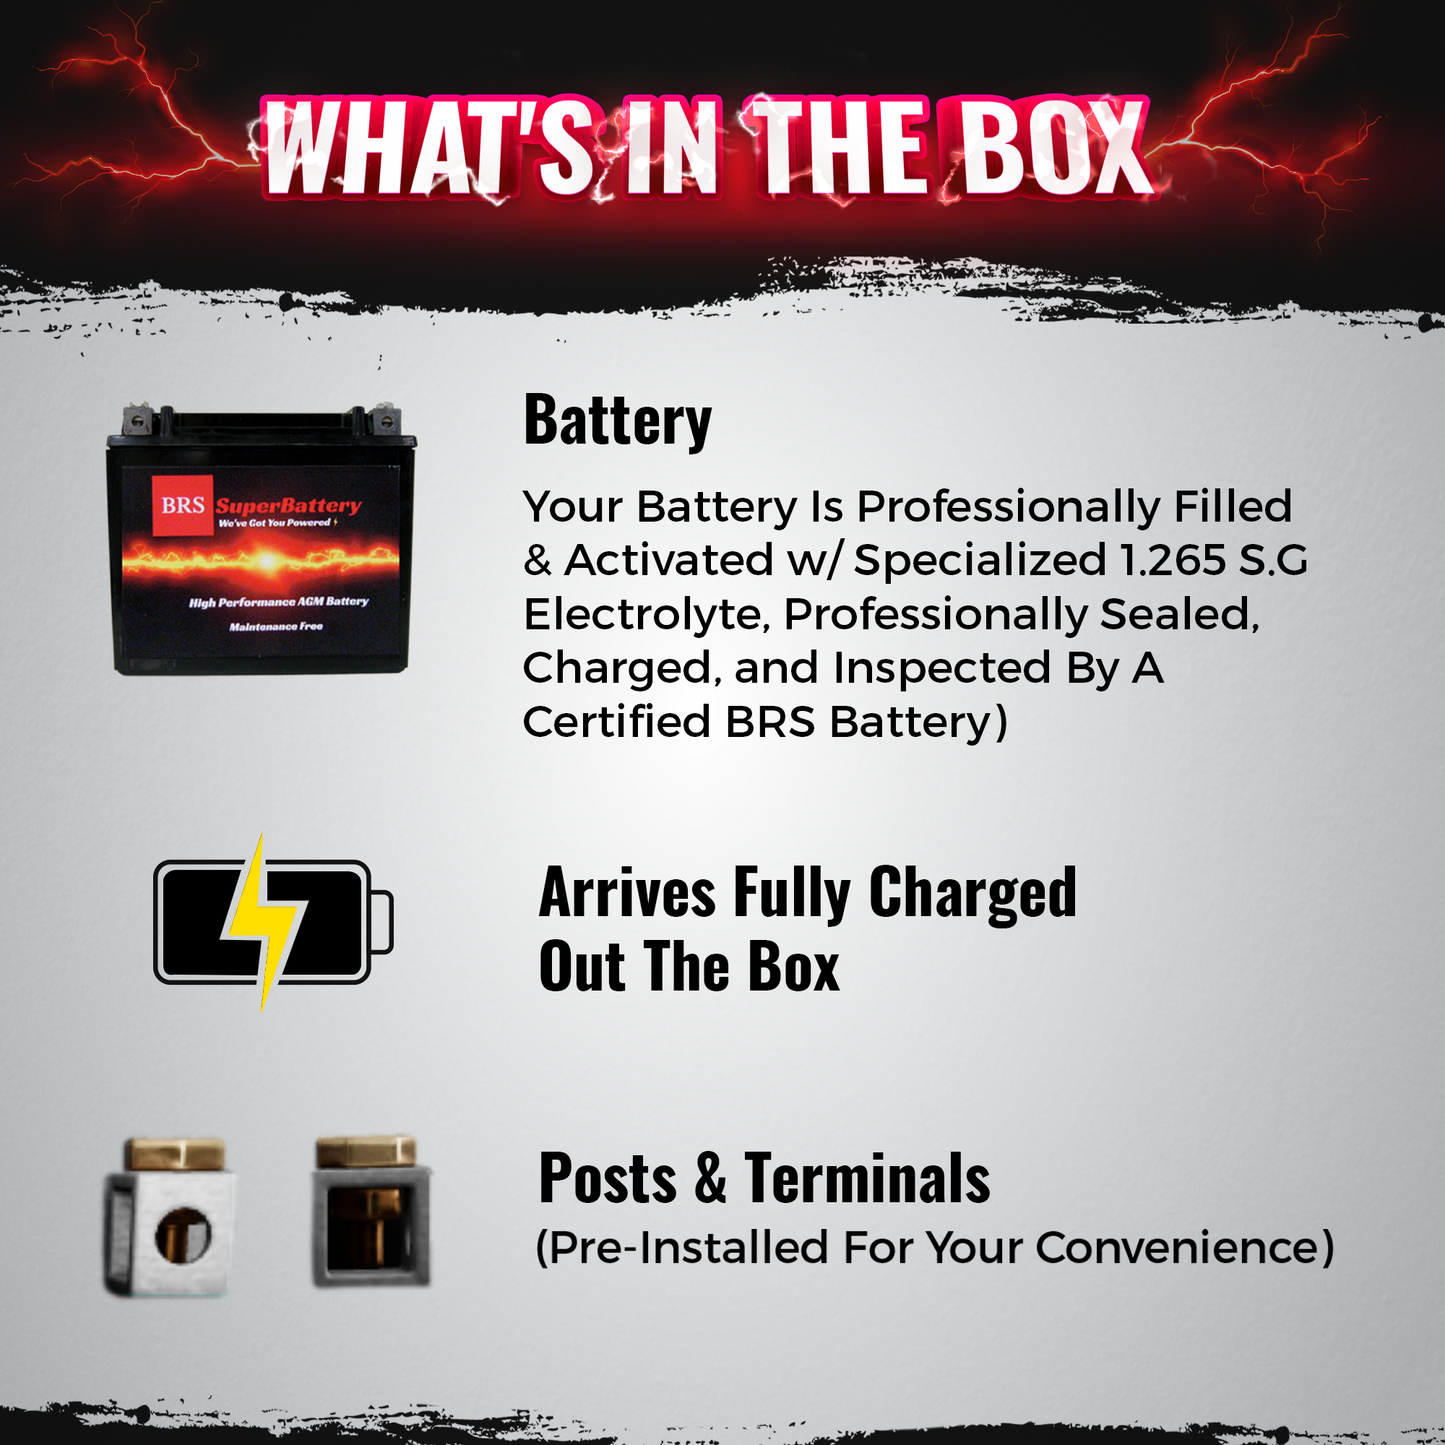 BRS14AH-BS 12v High Performance Sealed AGM PowerSport 10 Year Battery - BRS Super Battery